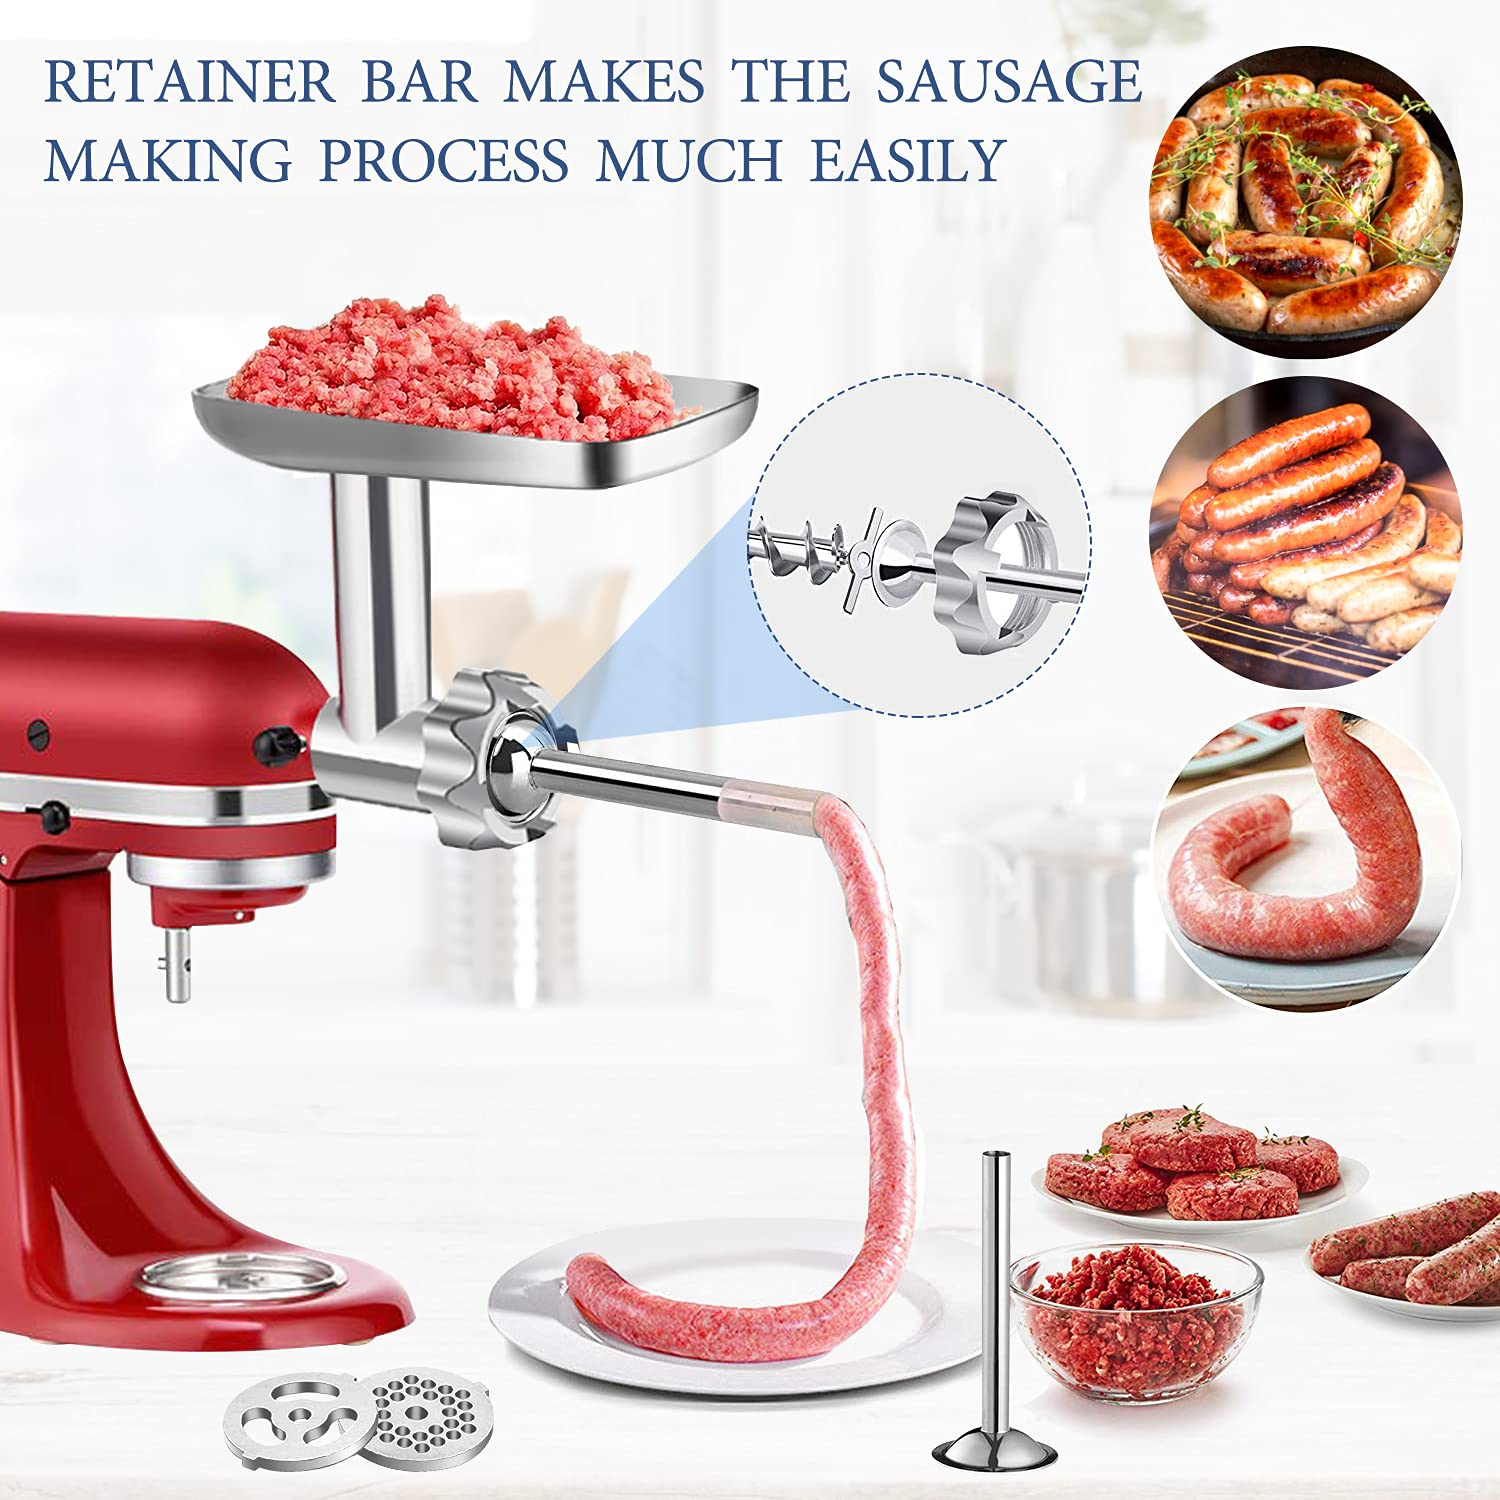 Buy the KitchenAid Food Grinder Attachment